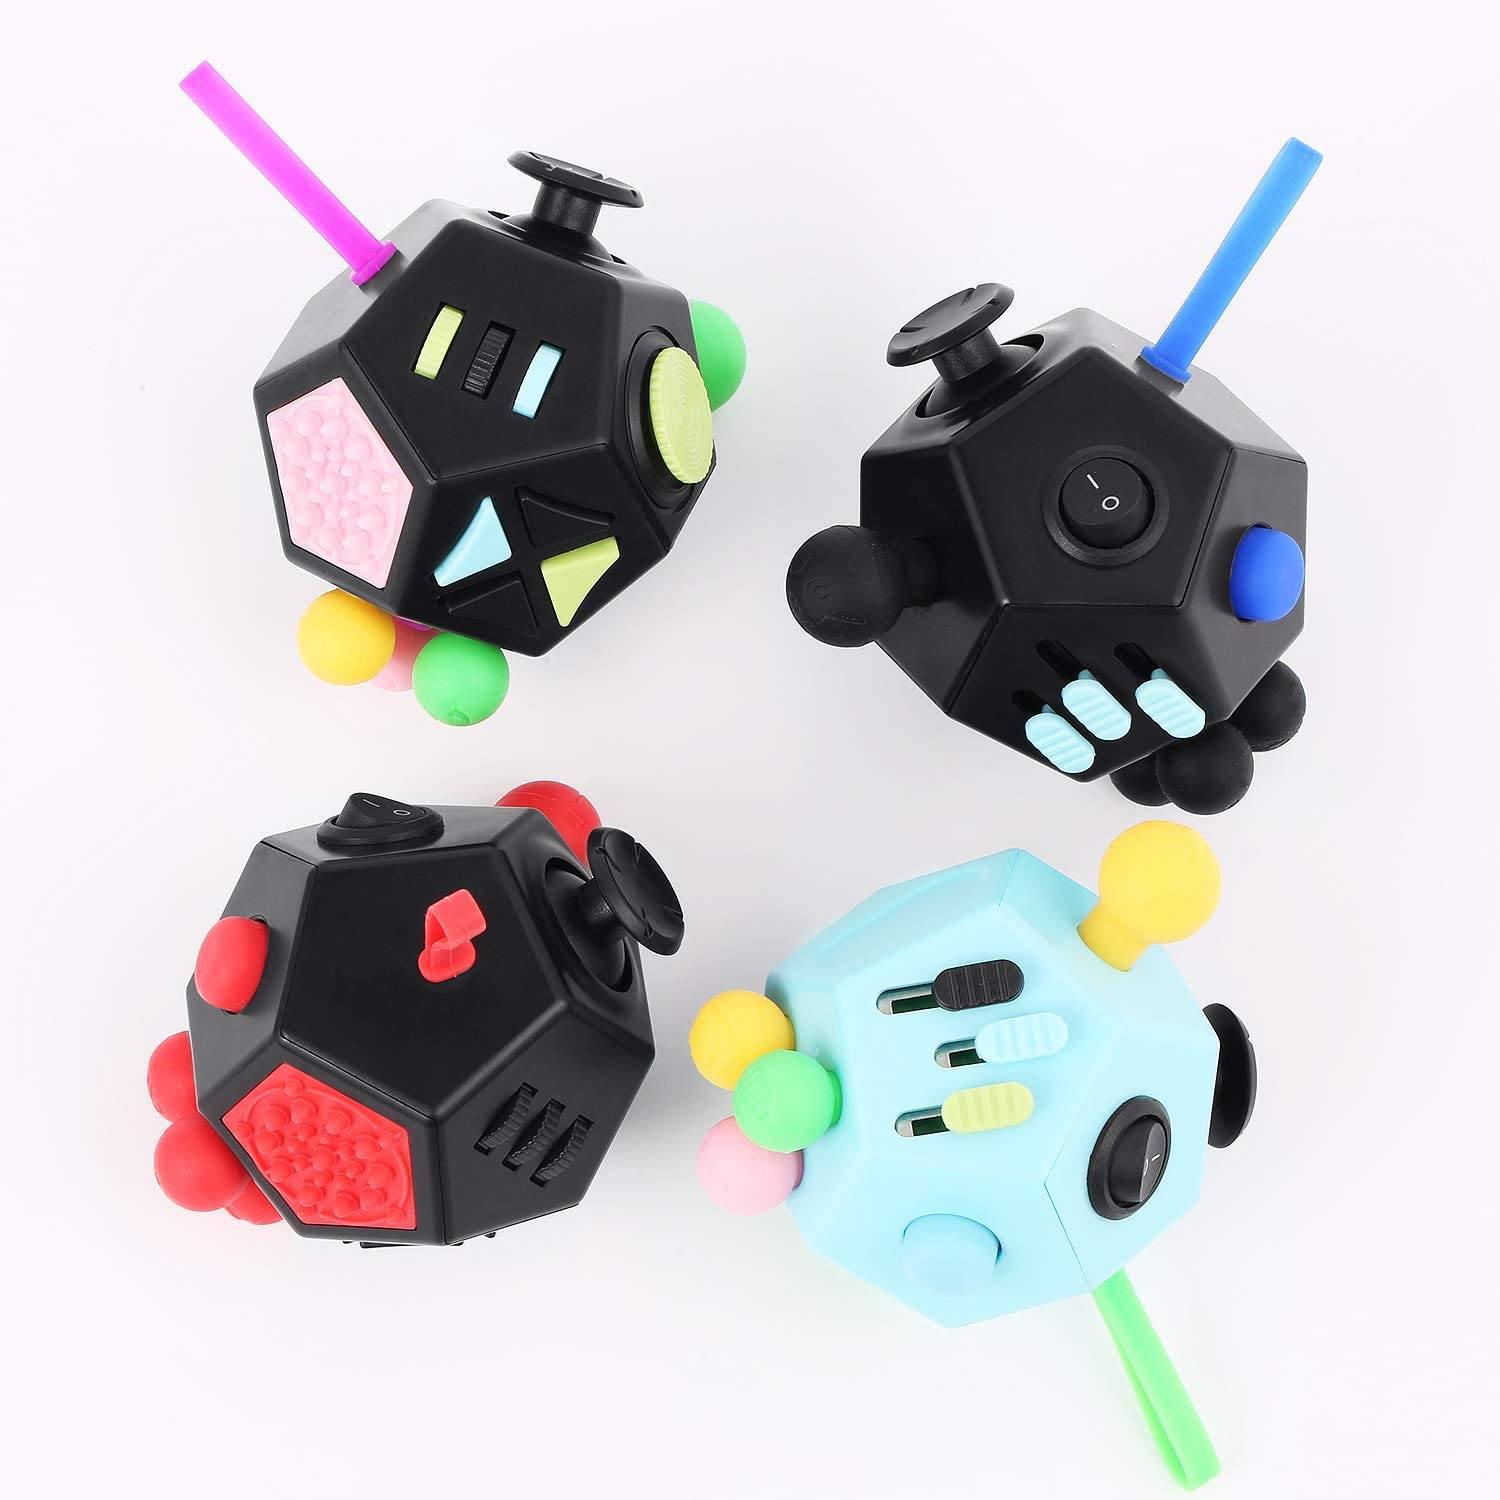 12 Sided Fidget Cube,Fidget Dodecagon Toys Anti-anxiety,Relieves Stress and for 